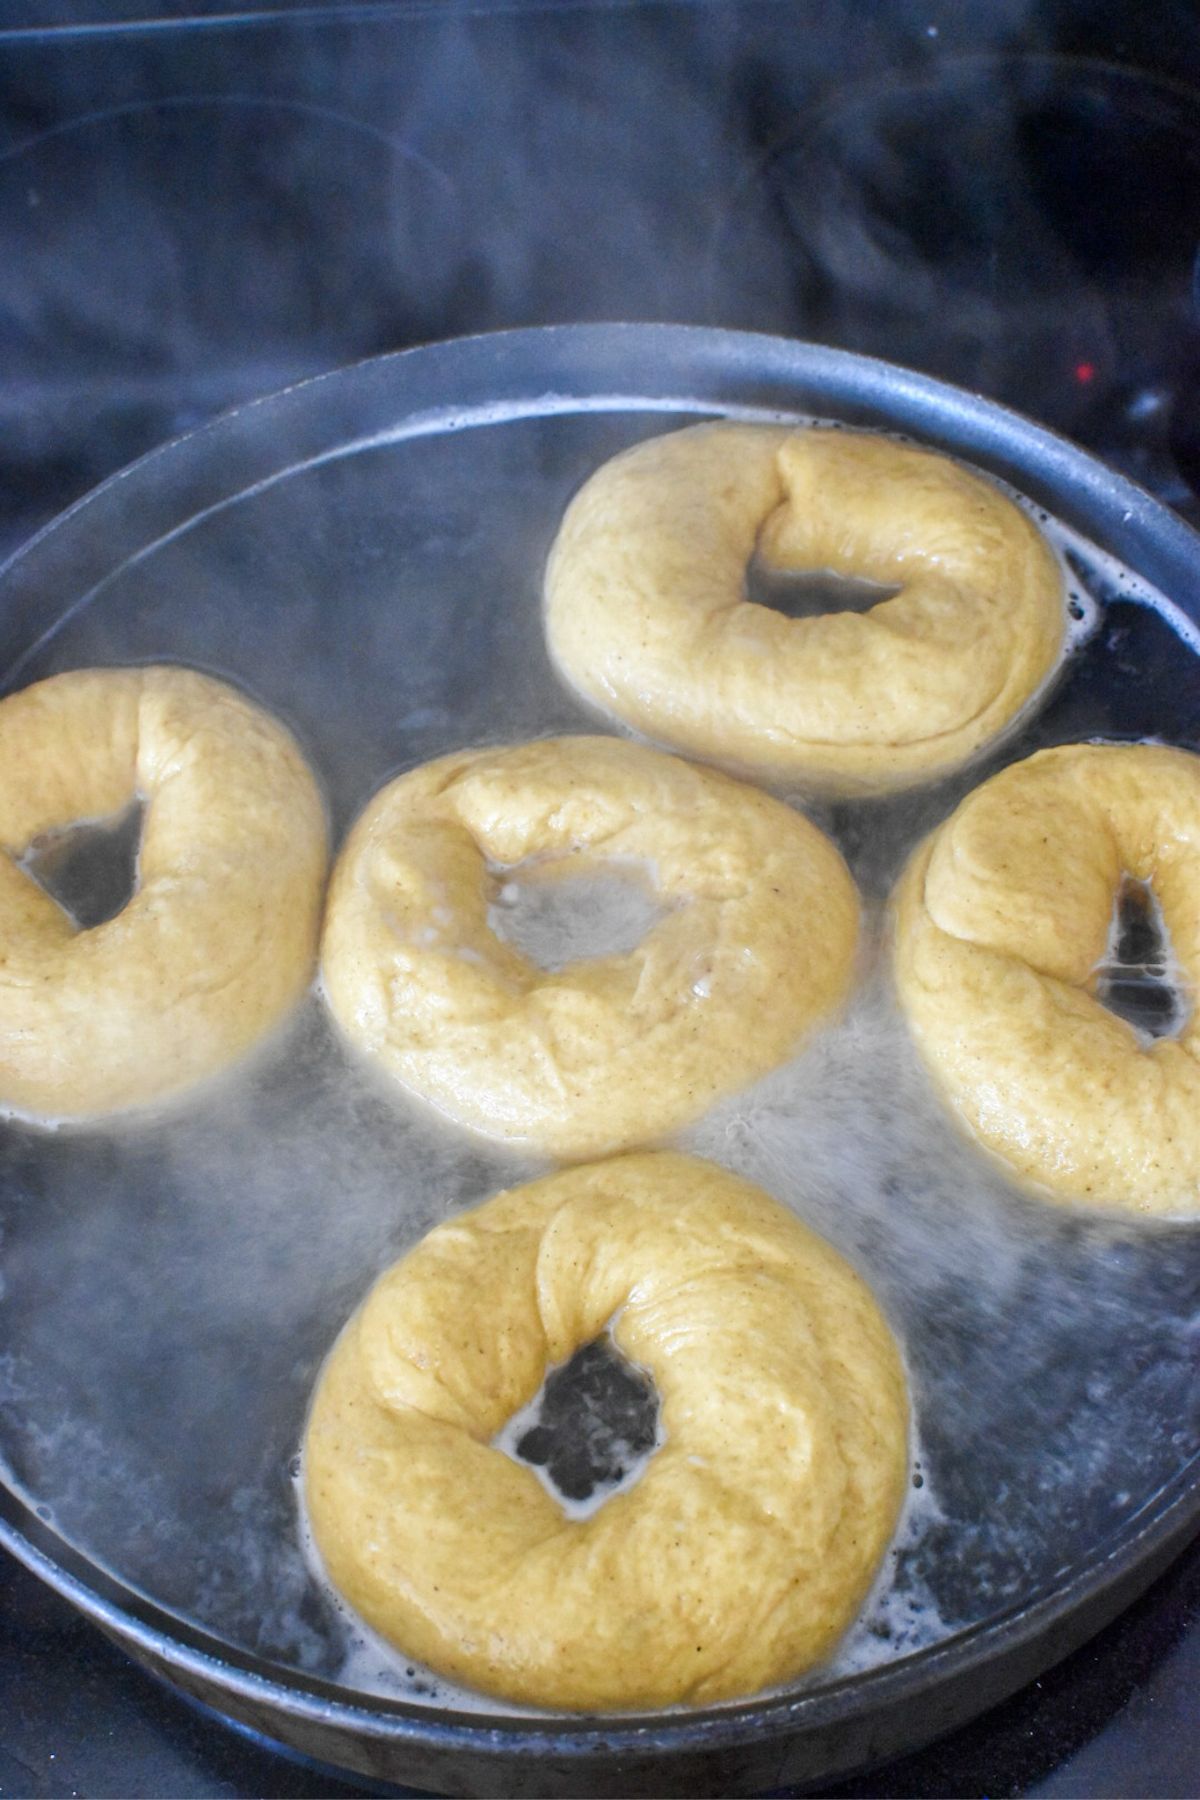 Boiling pumpkin bagels in a large pan on the stove.